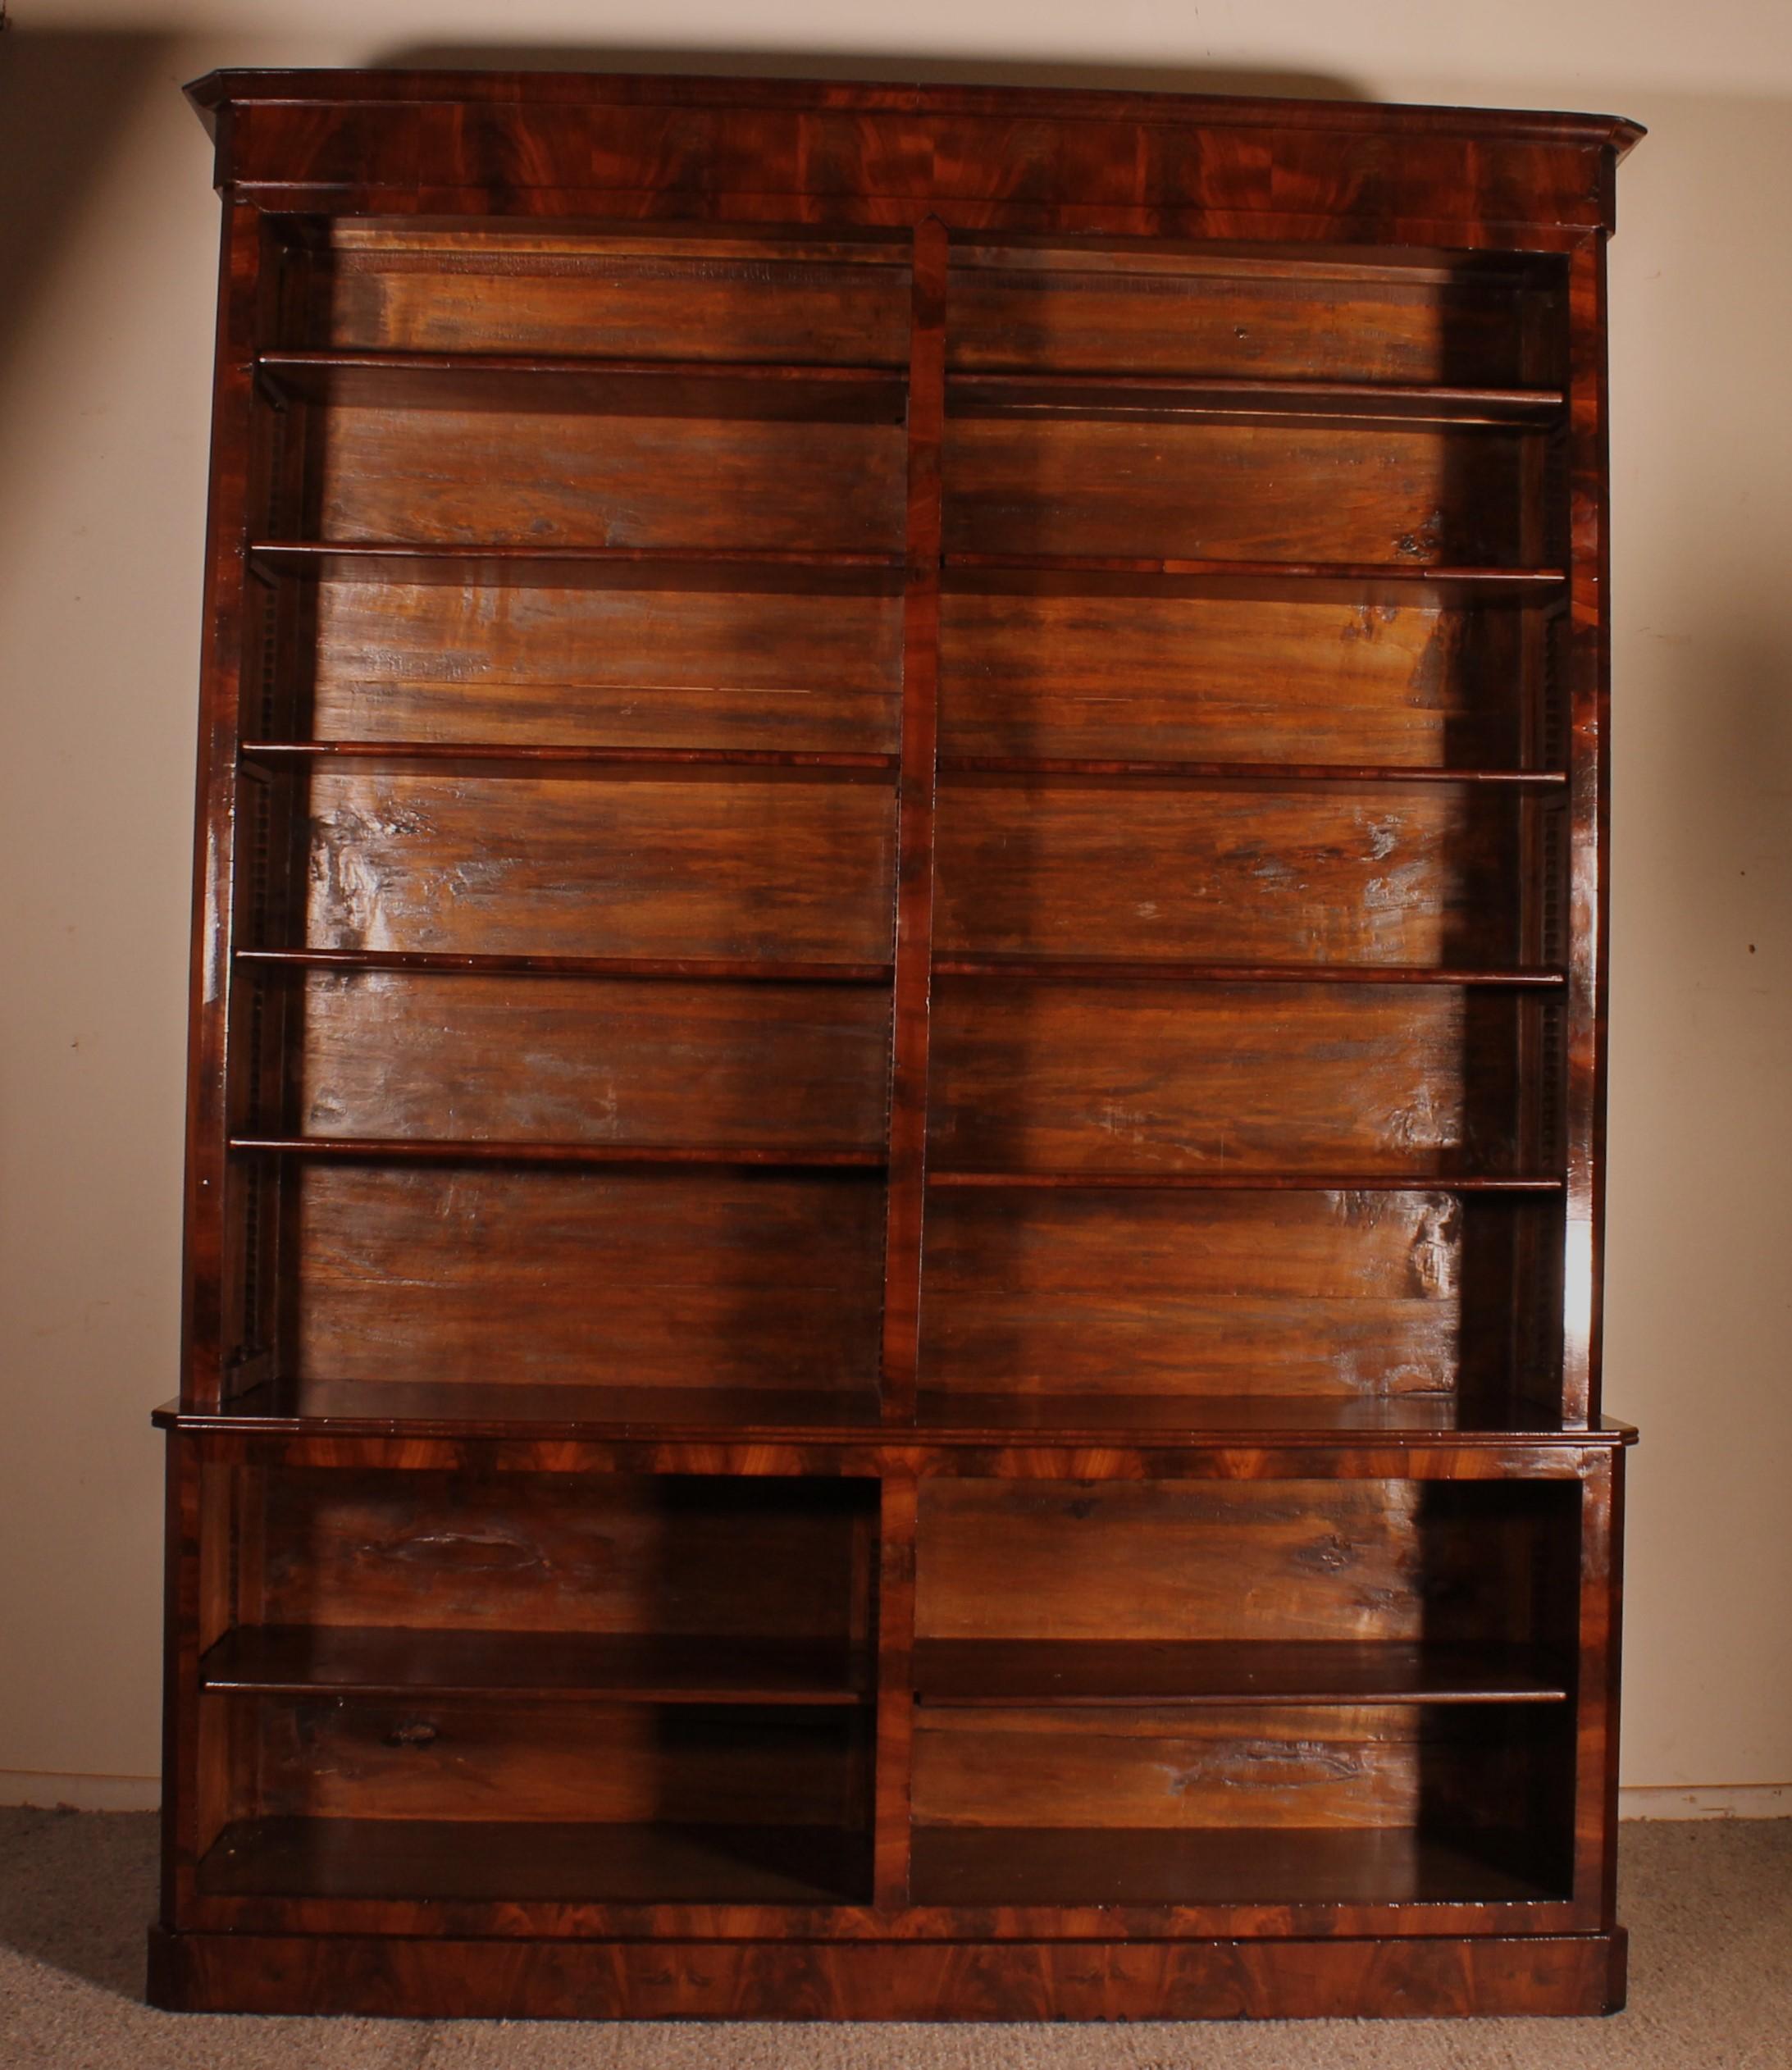 Elegant large open bookcase in mahogany from the 19th century from France
Very beautiful open bookcase of large size and high which is unusual with a deeper lower part. This makes it possible to display large objects and very large books

Very